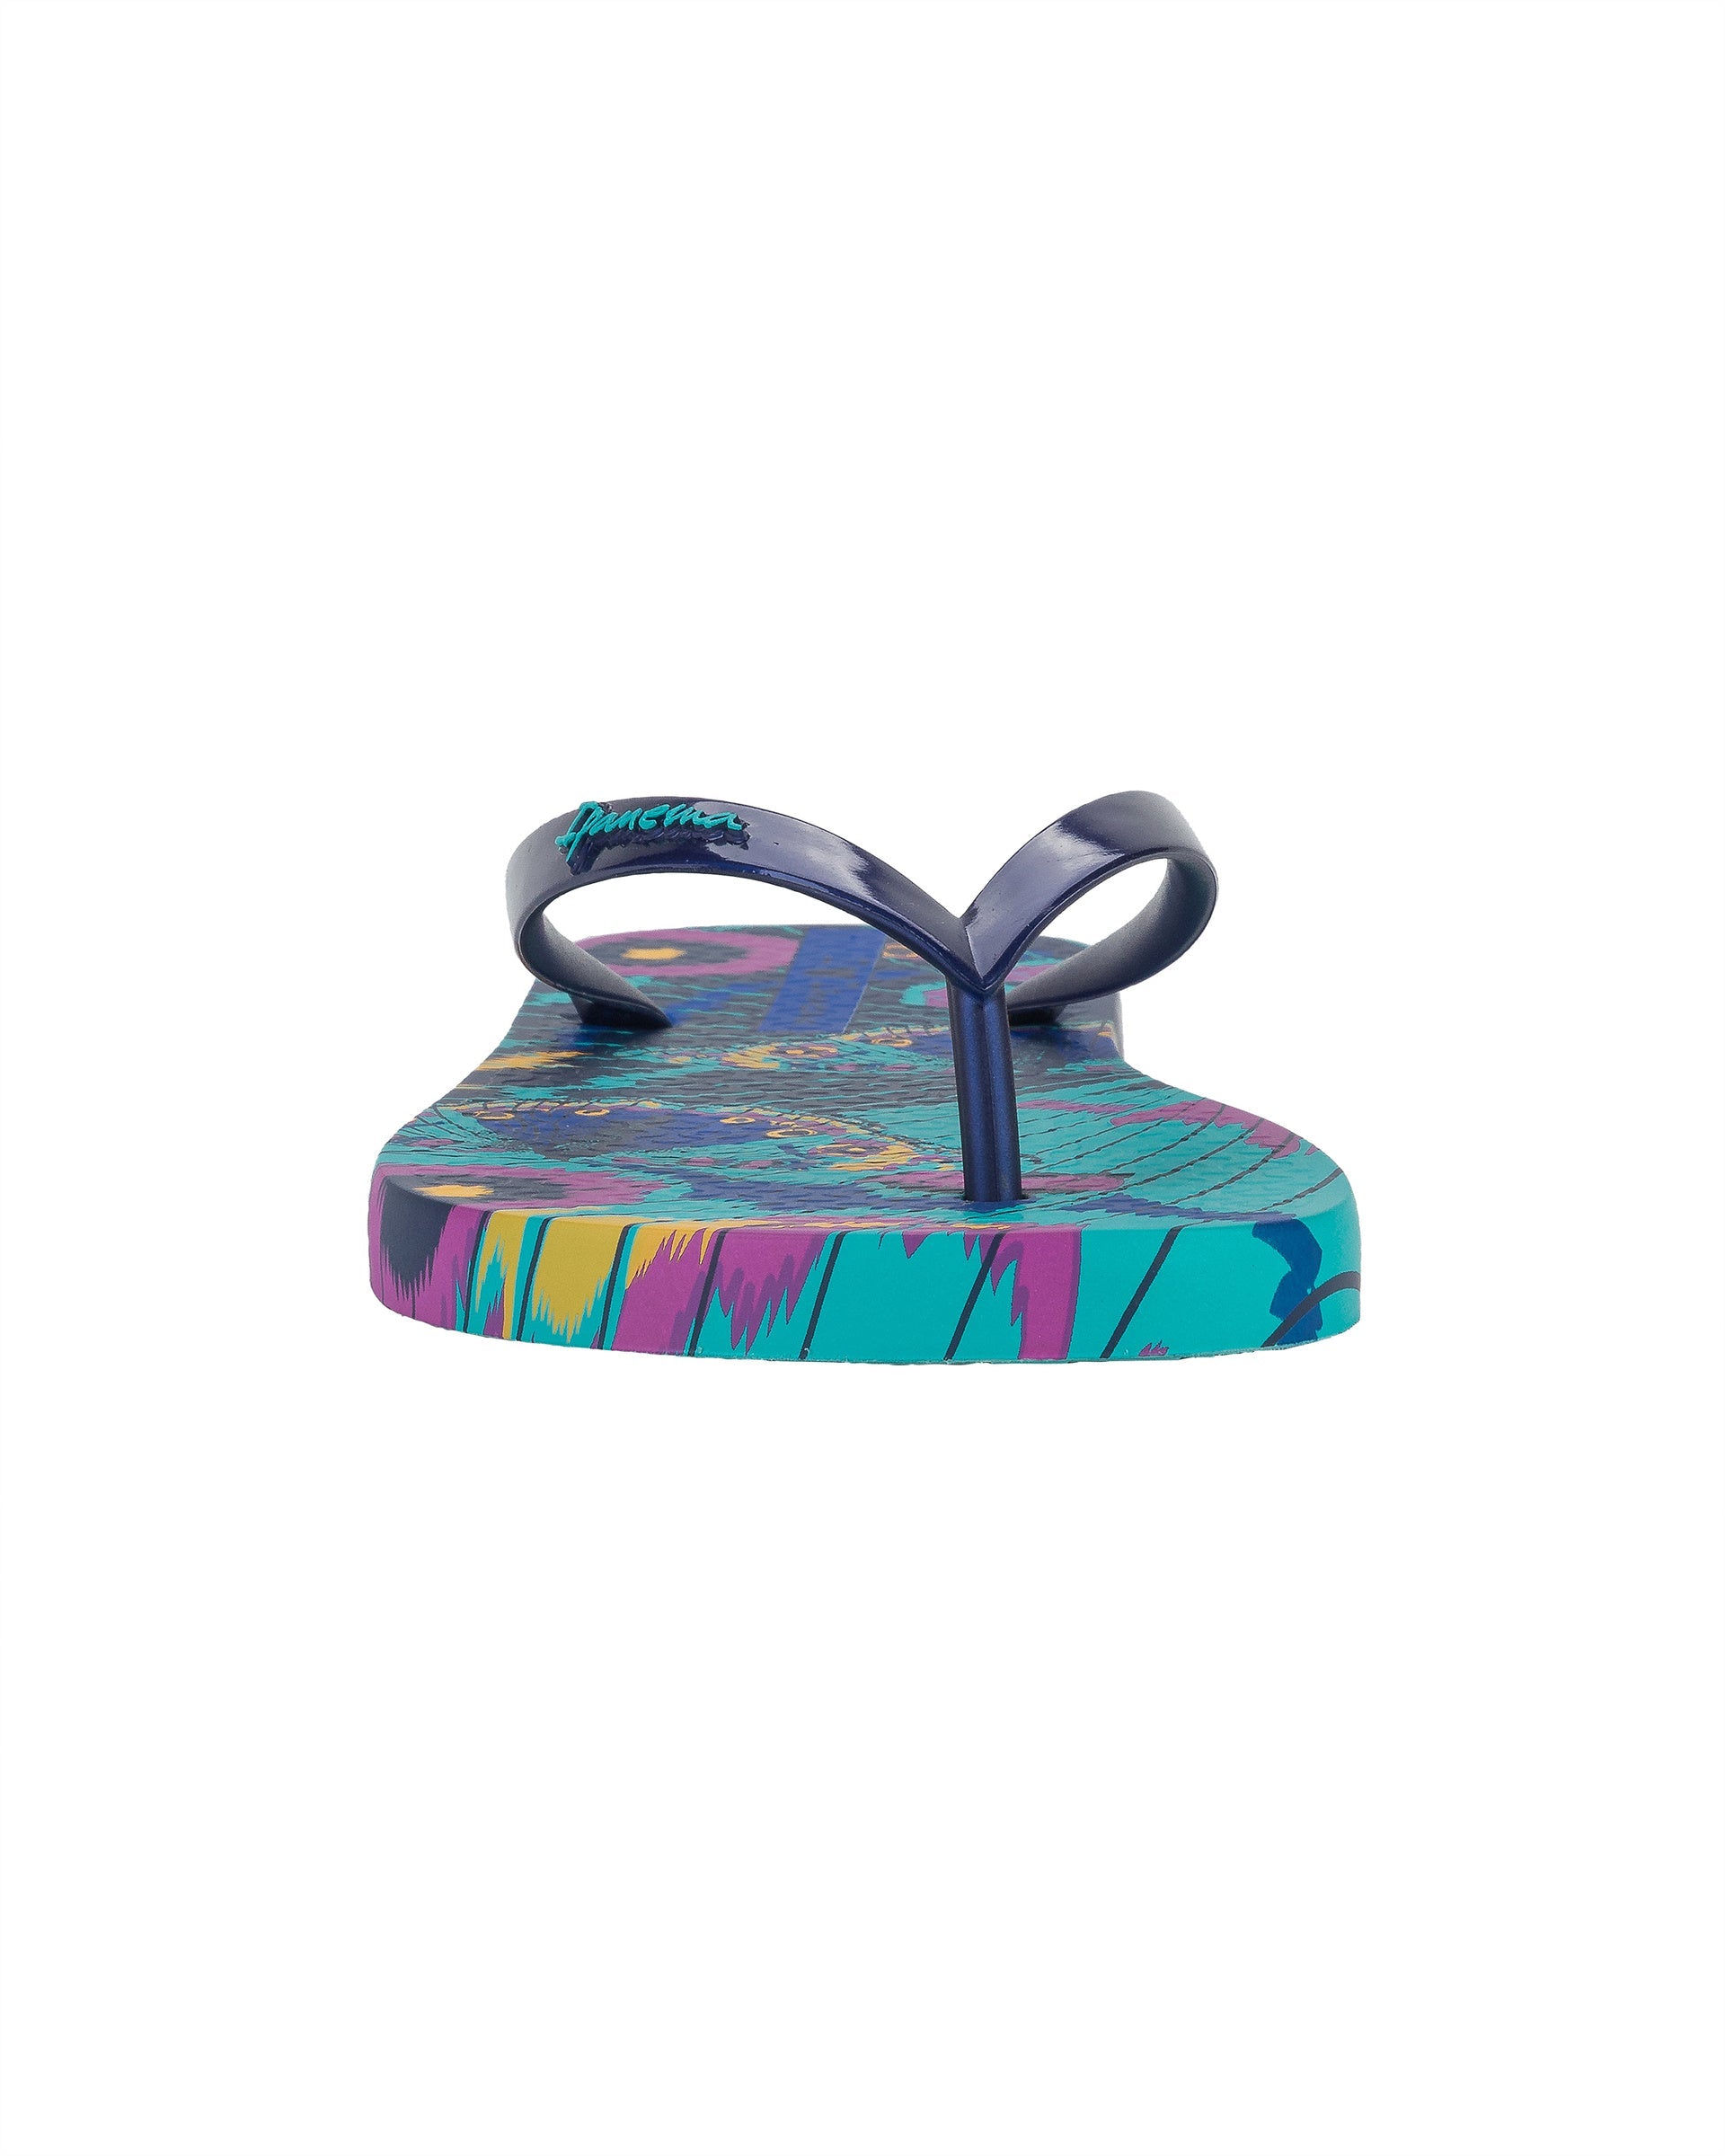 Front view of a blue Ipanema Animal Print women's flip flop with glitter blue straps and butterfly sole print.